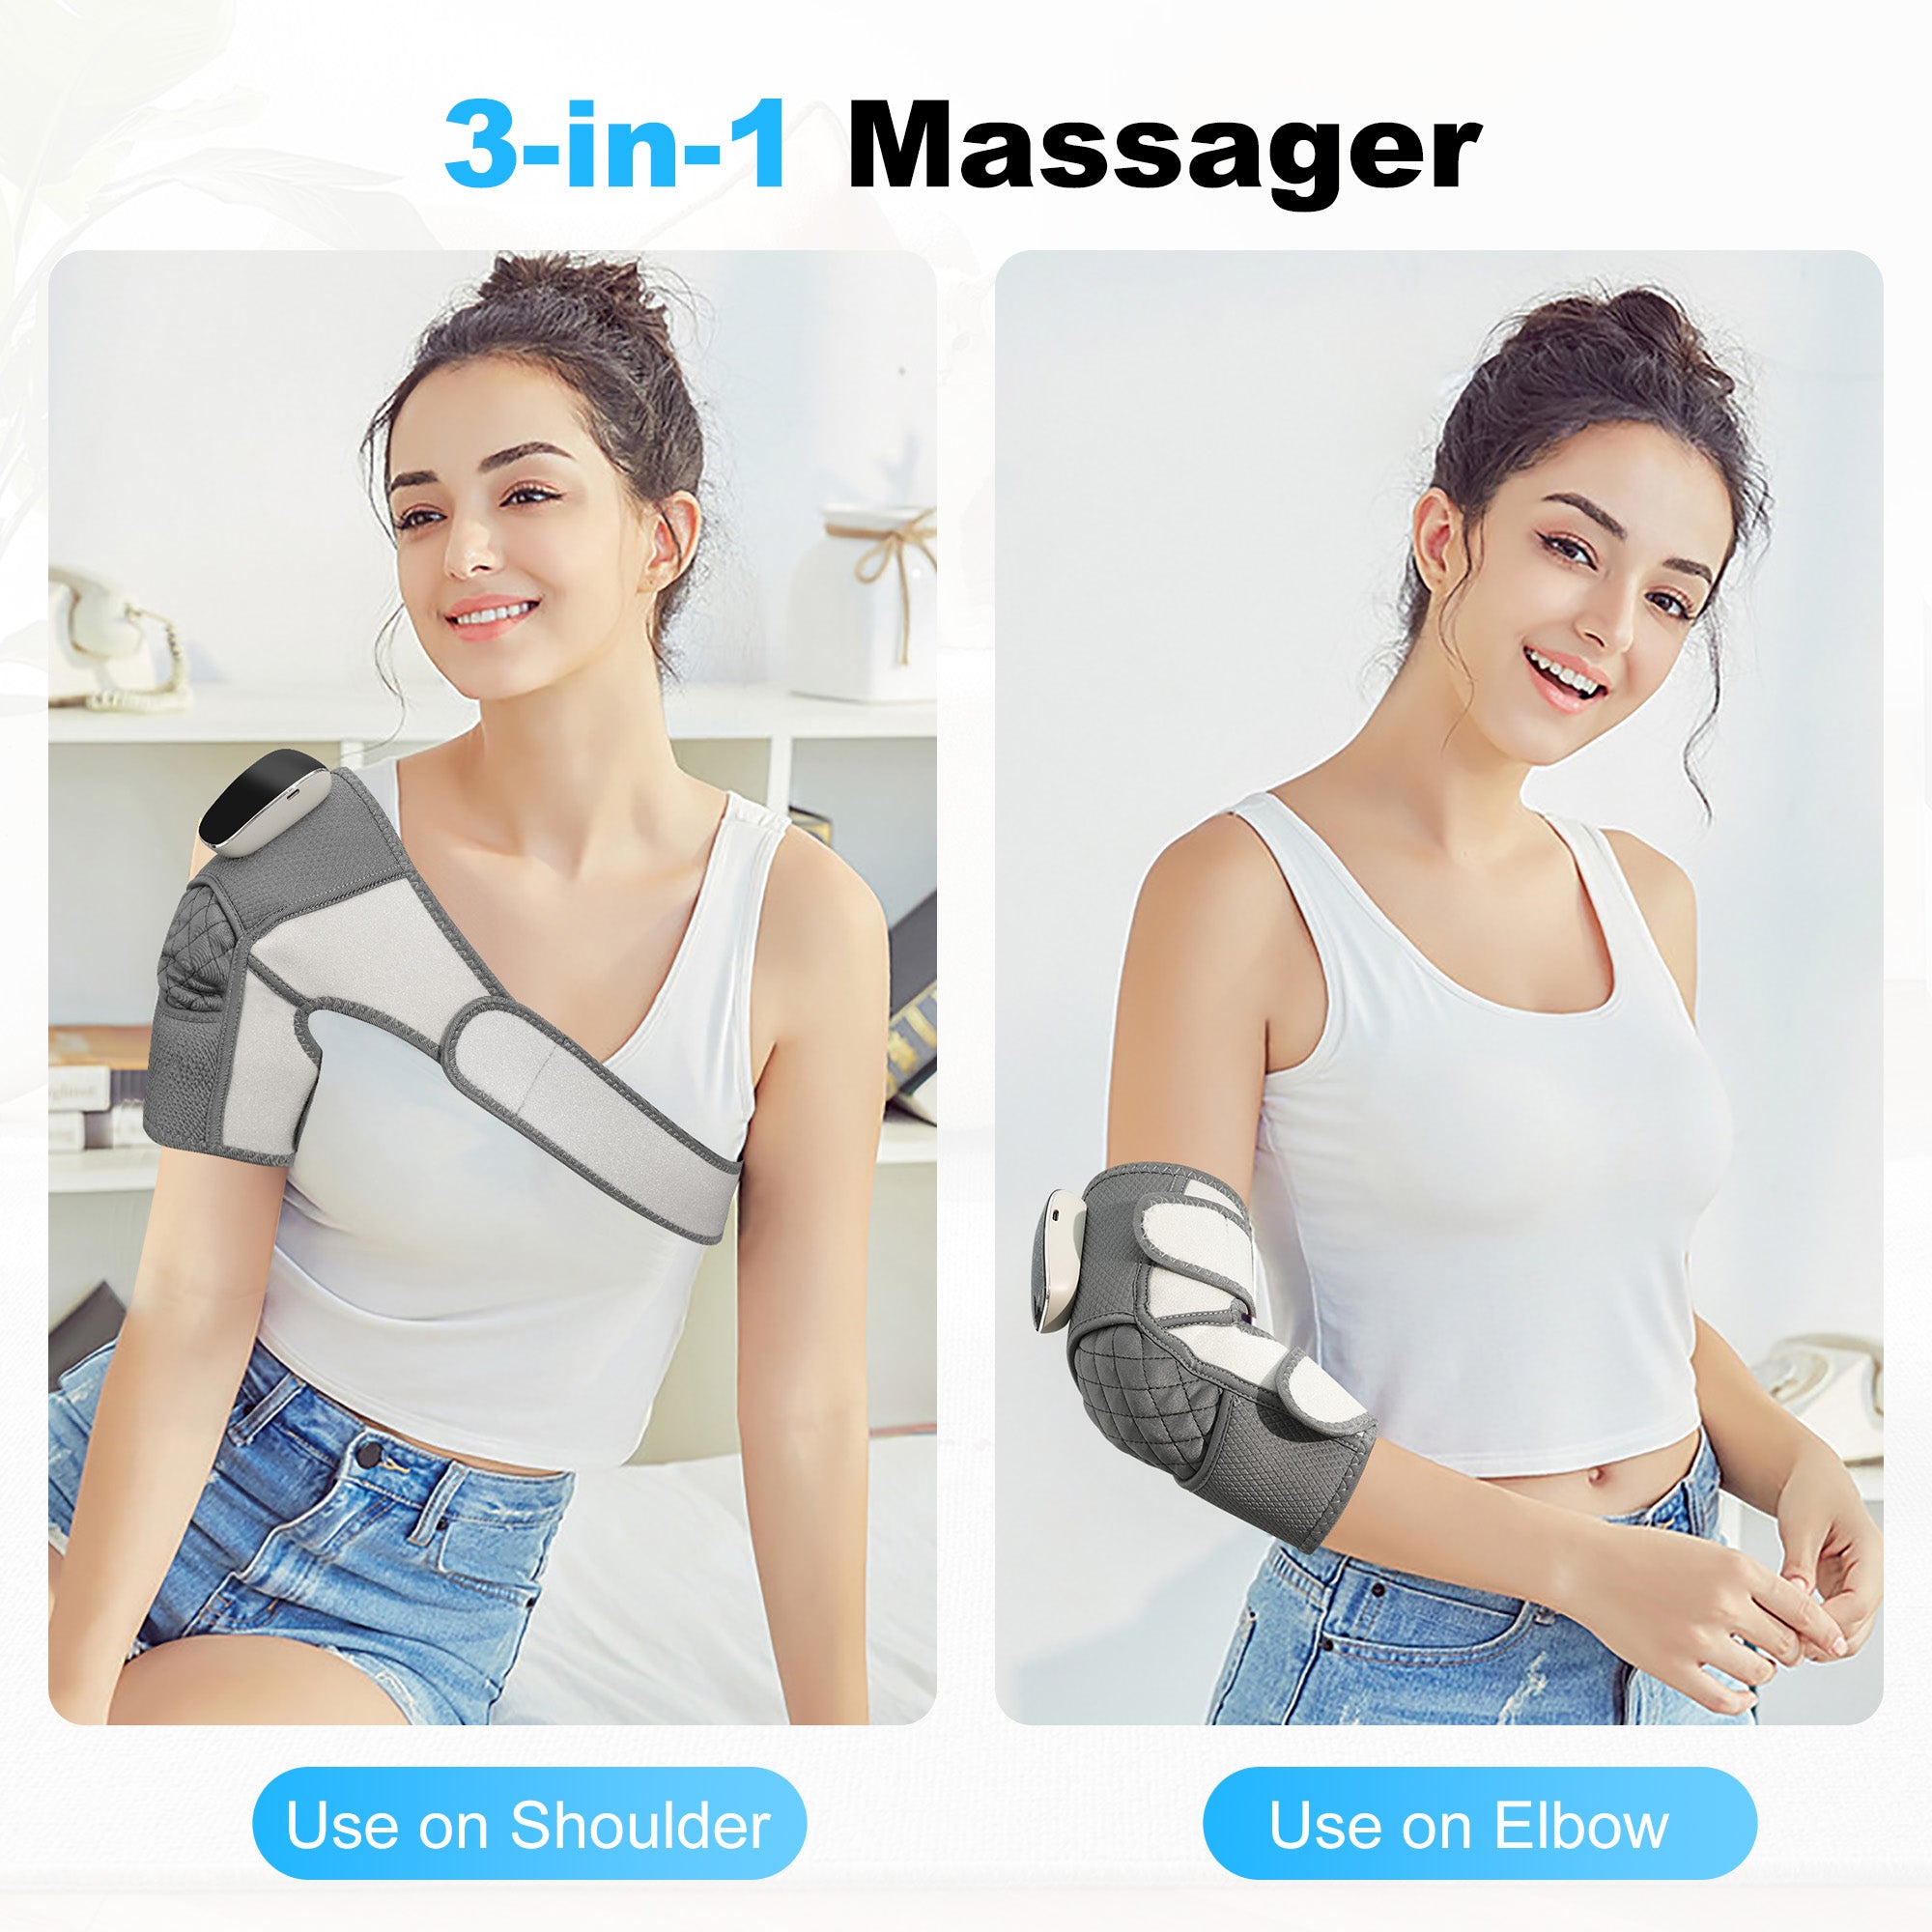 COMFIER Cordless Knee Massager with Heat, Vibration Knee Brace Wrap for Arthritis Pain Relief, 3-in-1 Heating Pad for Knee Shoulder Elbow, Knee Warmer, Electric Knee Support Pad Sleeve (Pair Pack) CF-5321